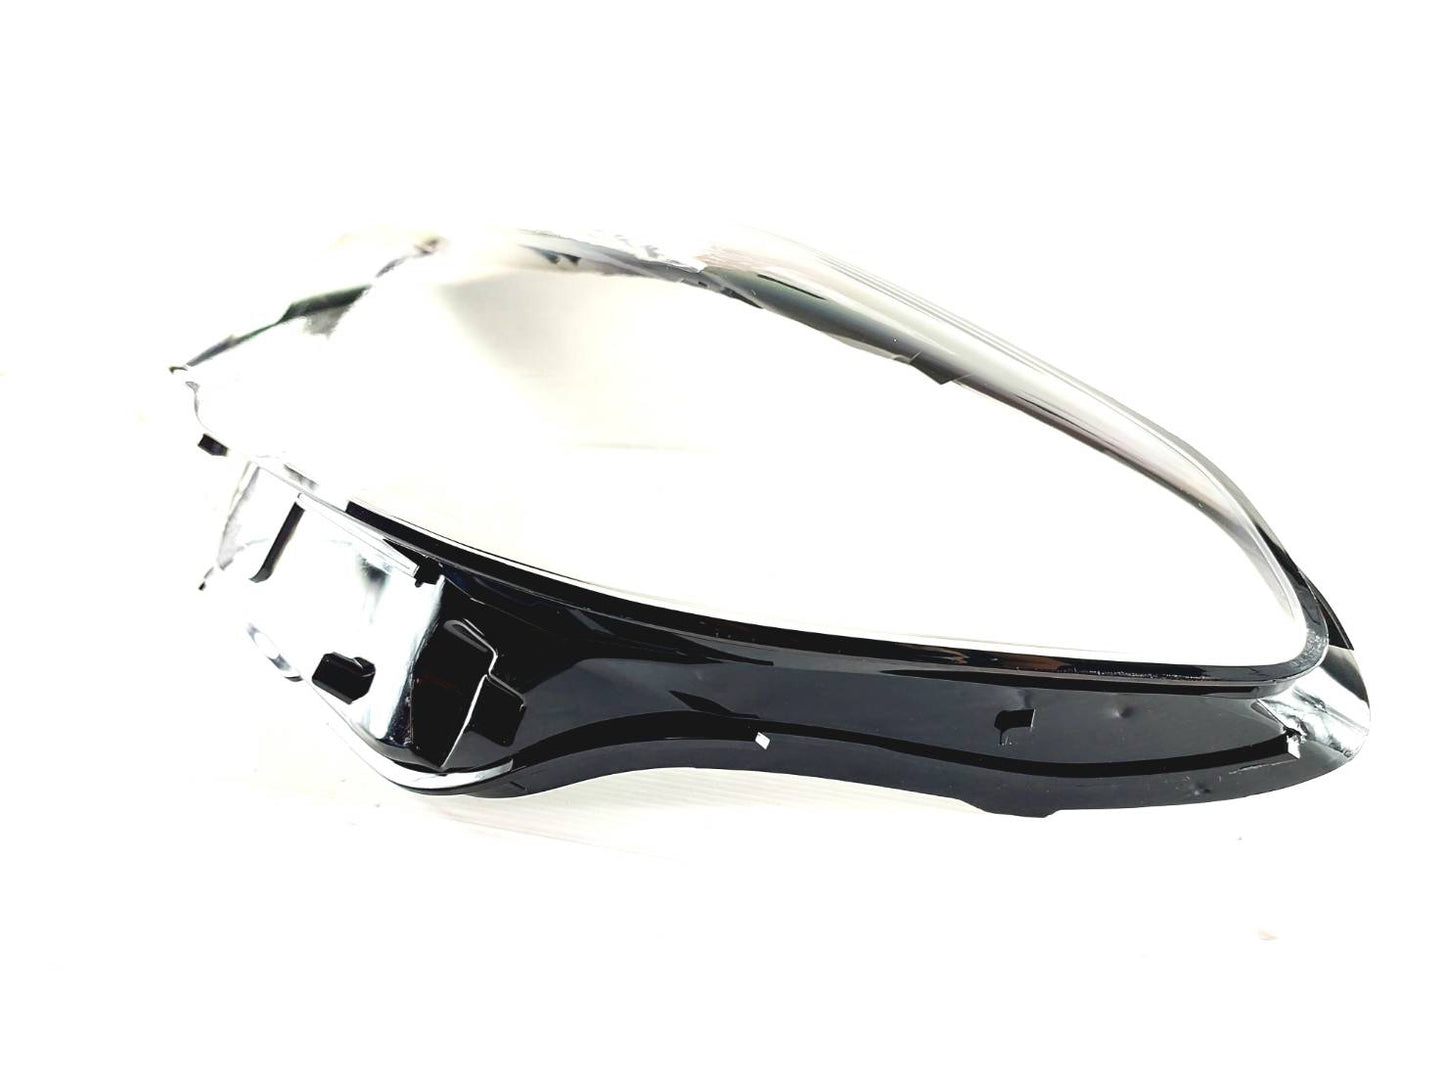 Cover Shell For BMW G30/G38 (20-22)